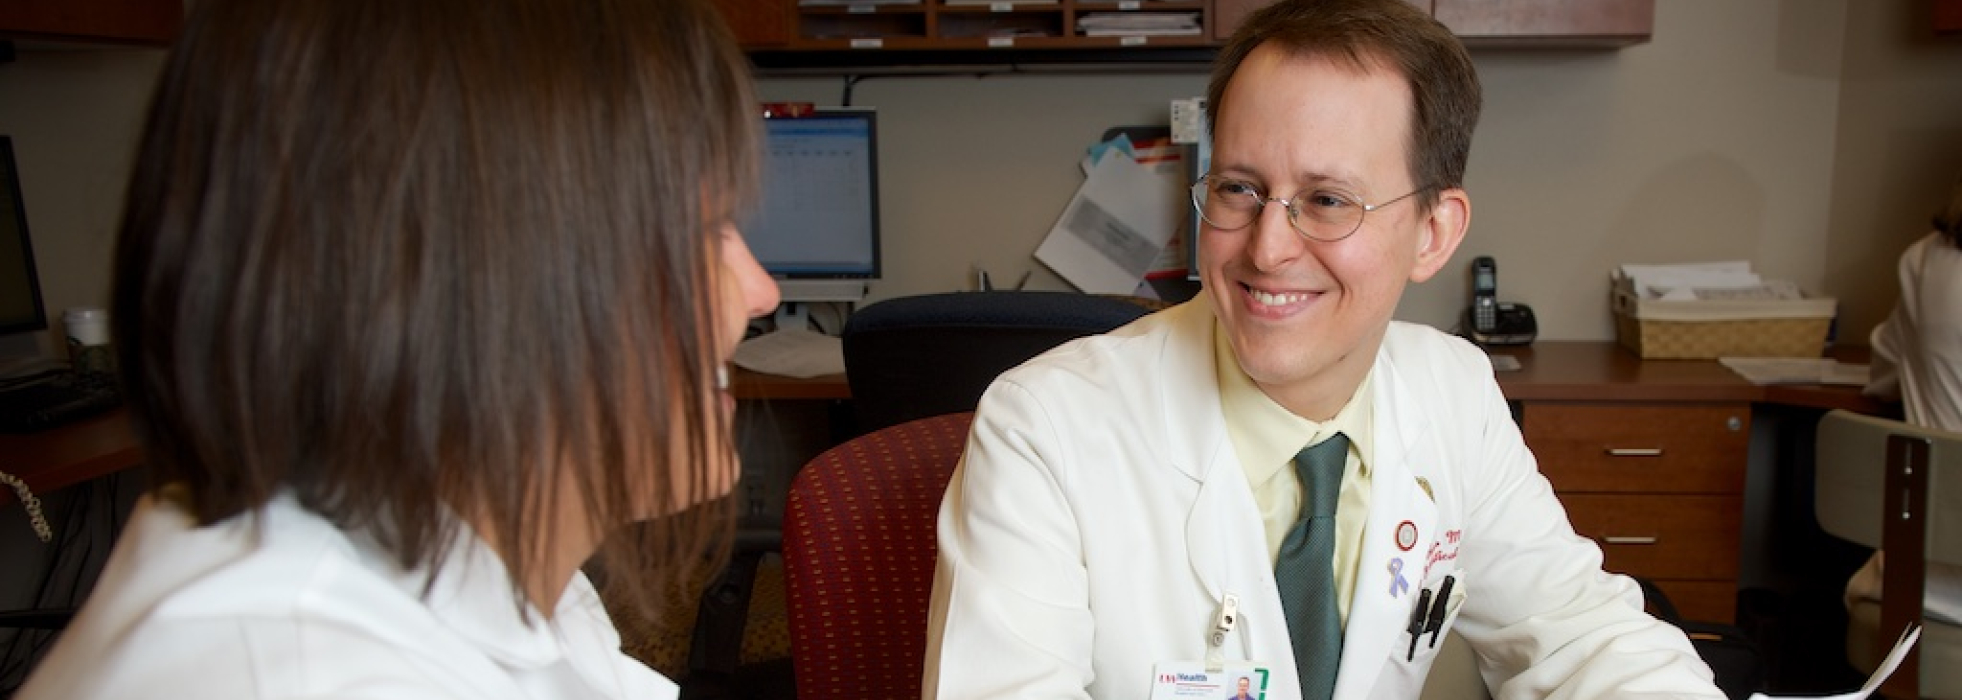 Dr. James Runo in a white coat talking with a colleague at an office table